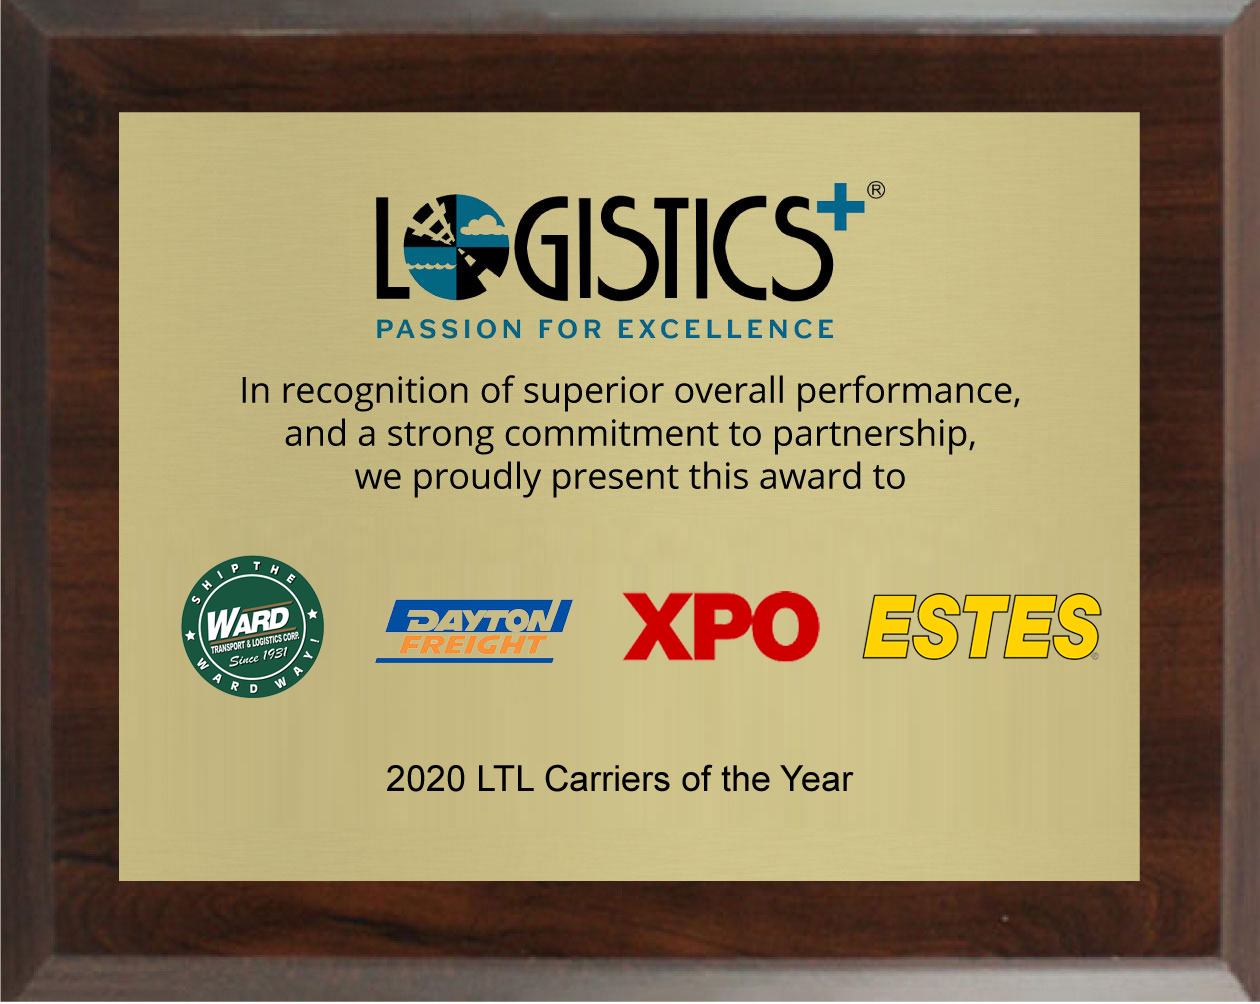 2020 LTL Carriers of the Year